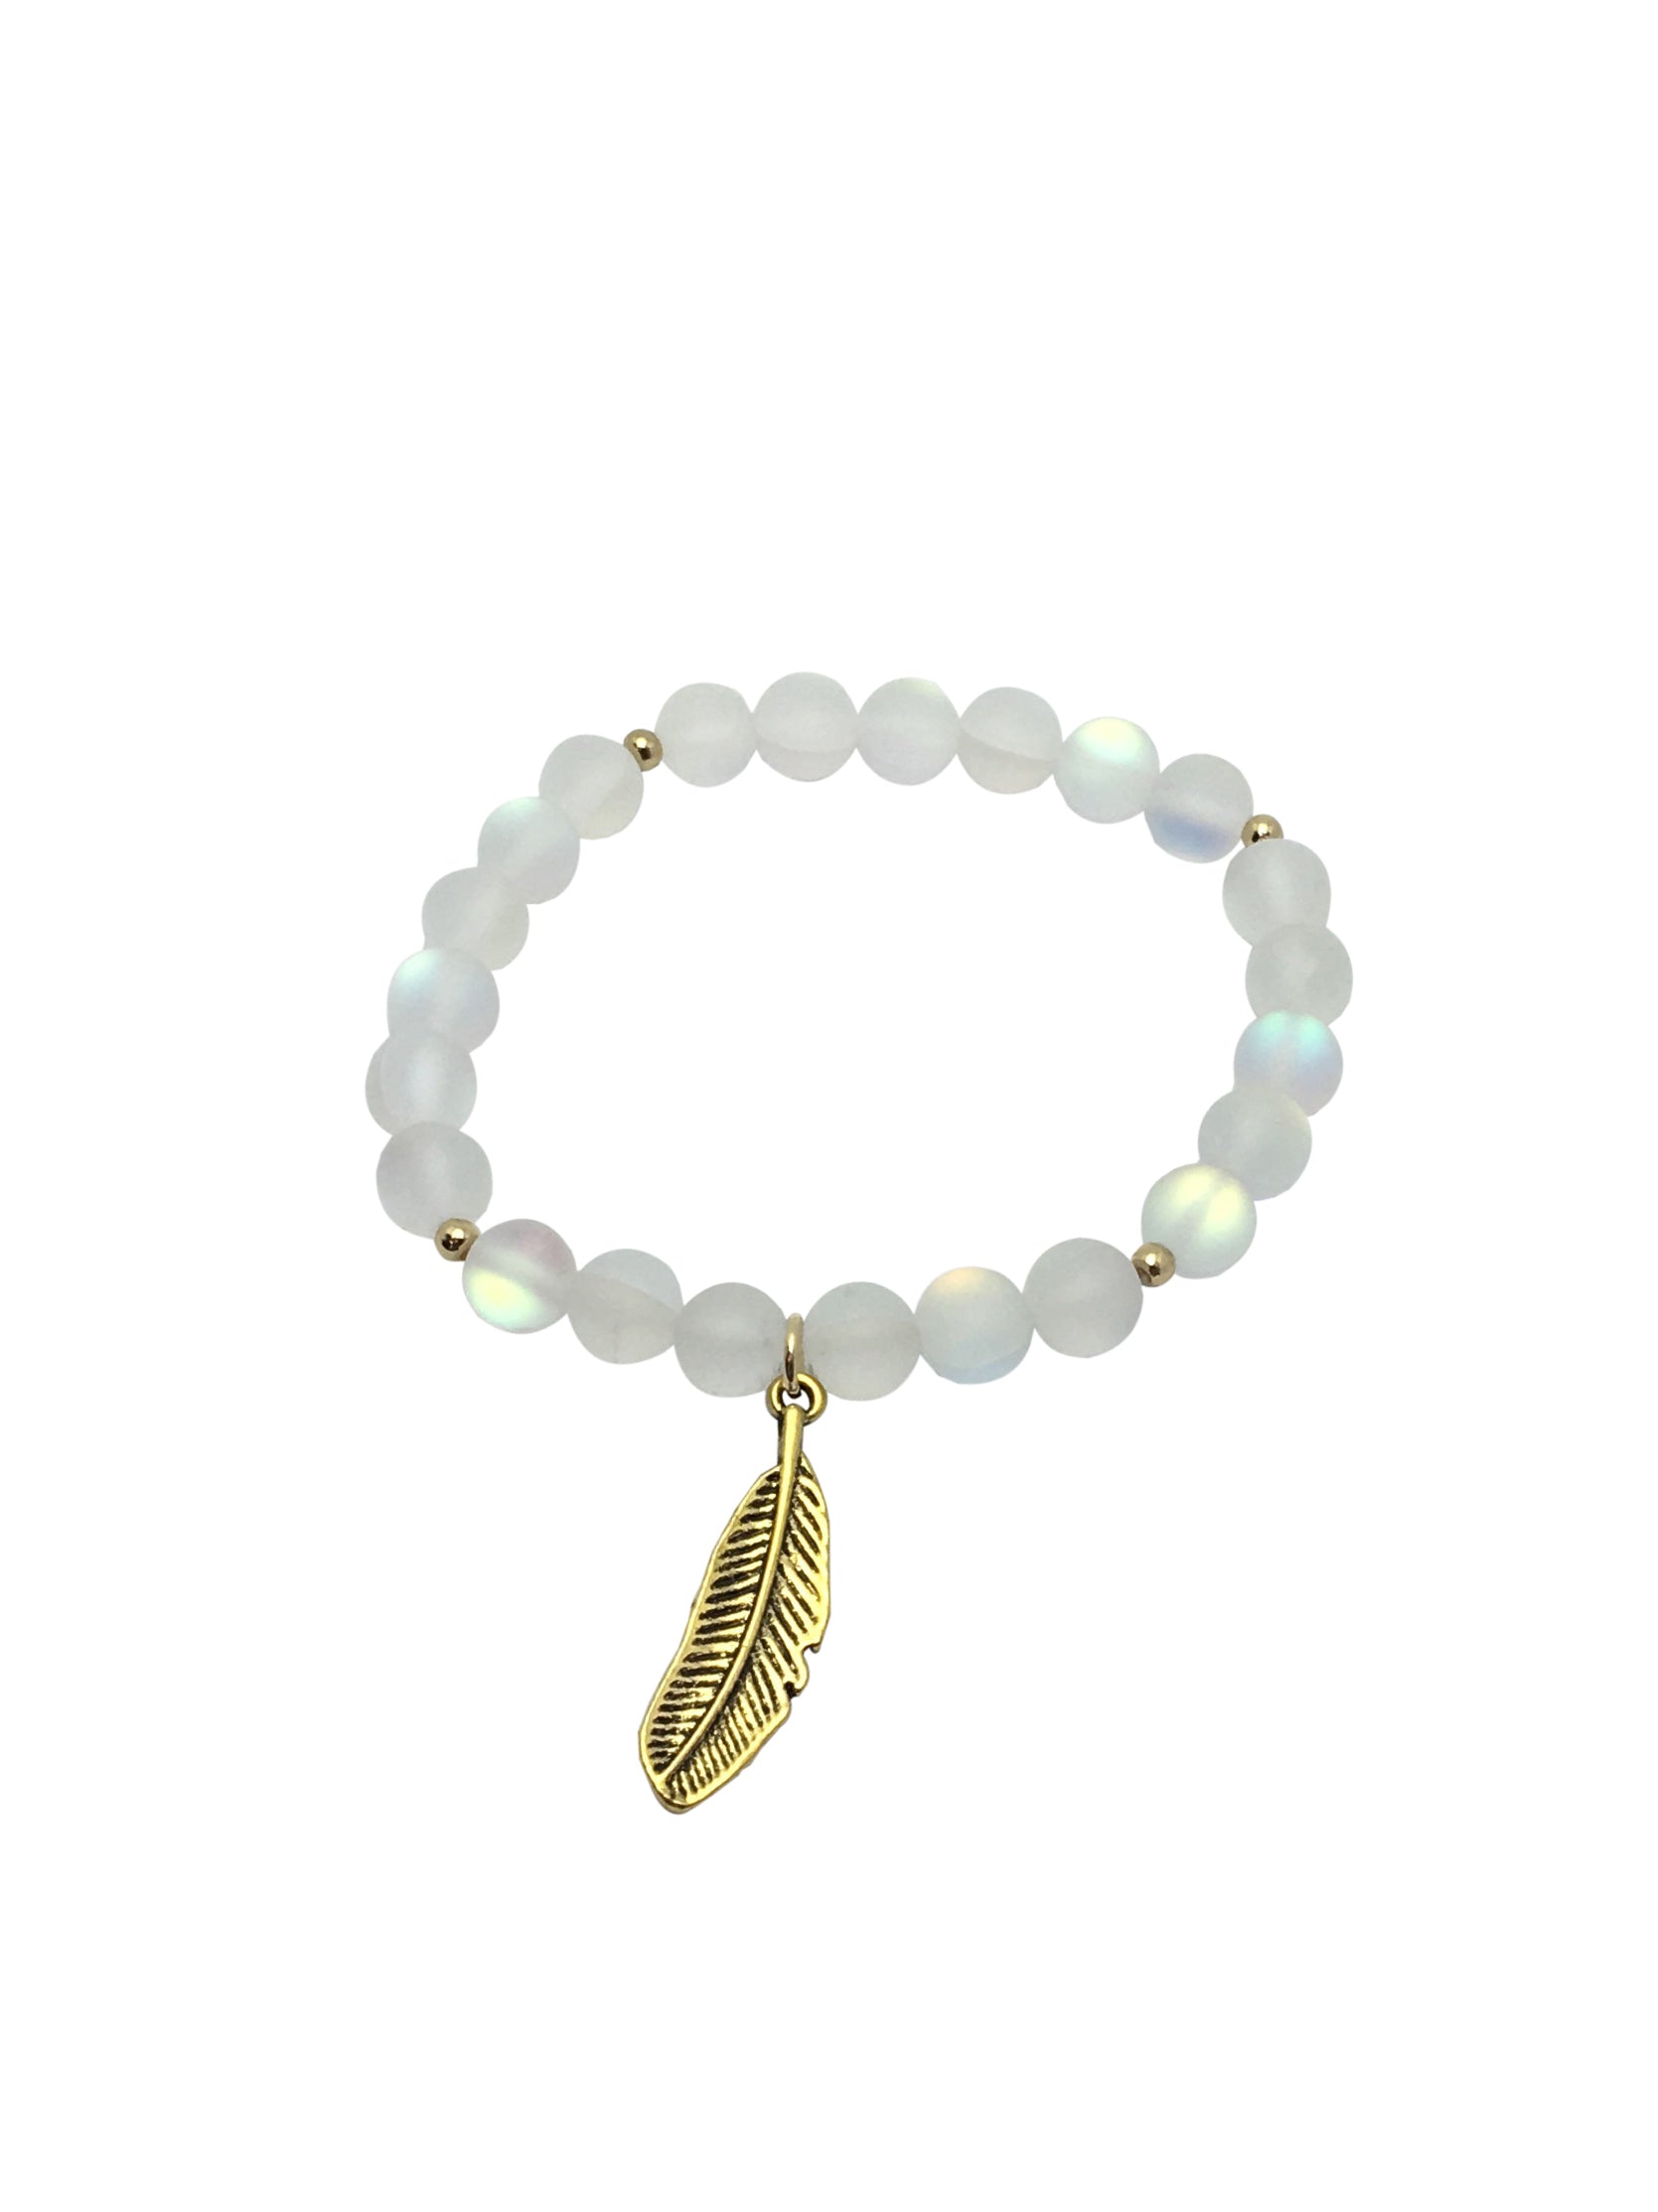 Gem Bead Collection - White Feather Bracelet